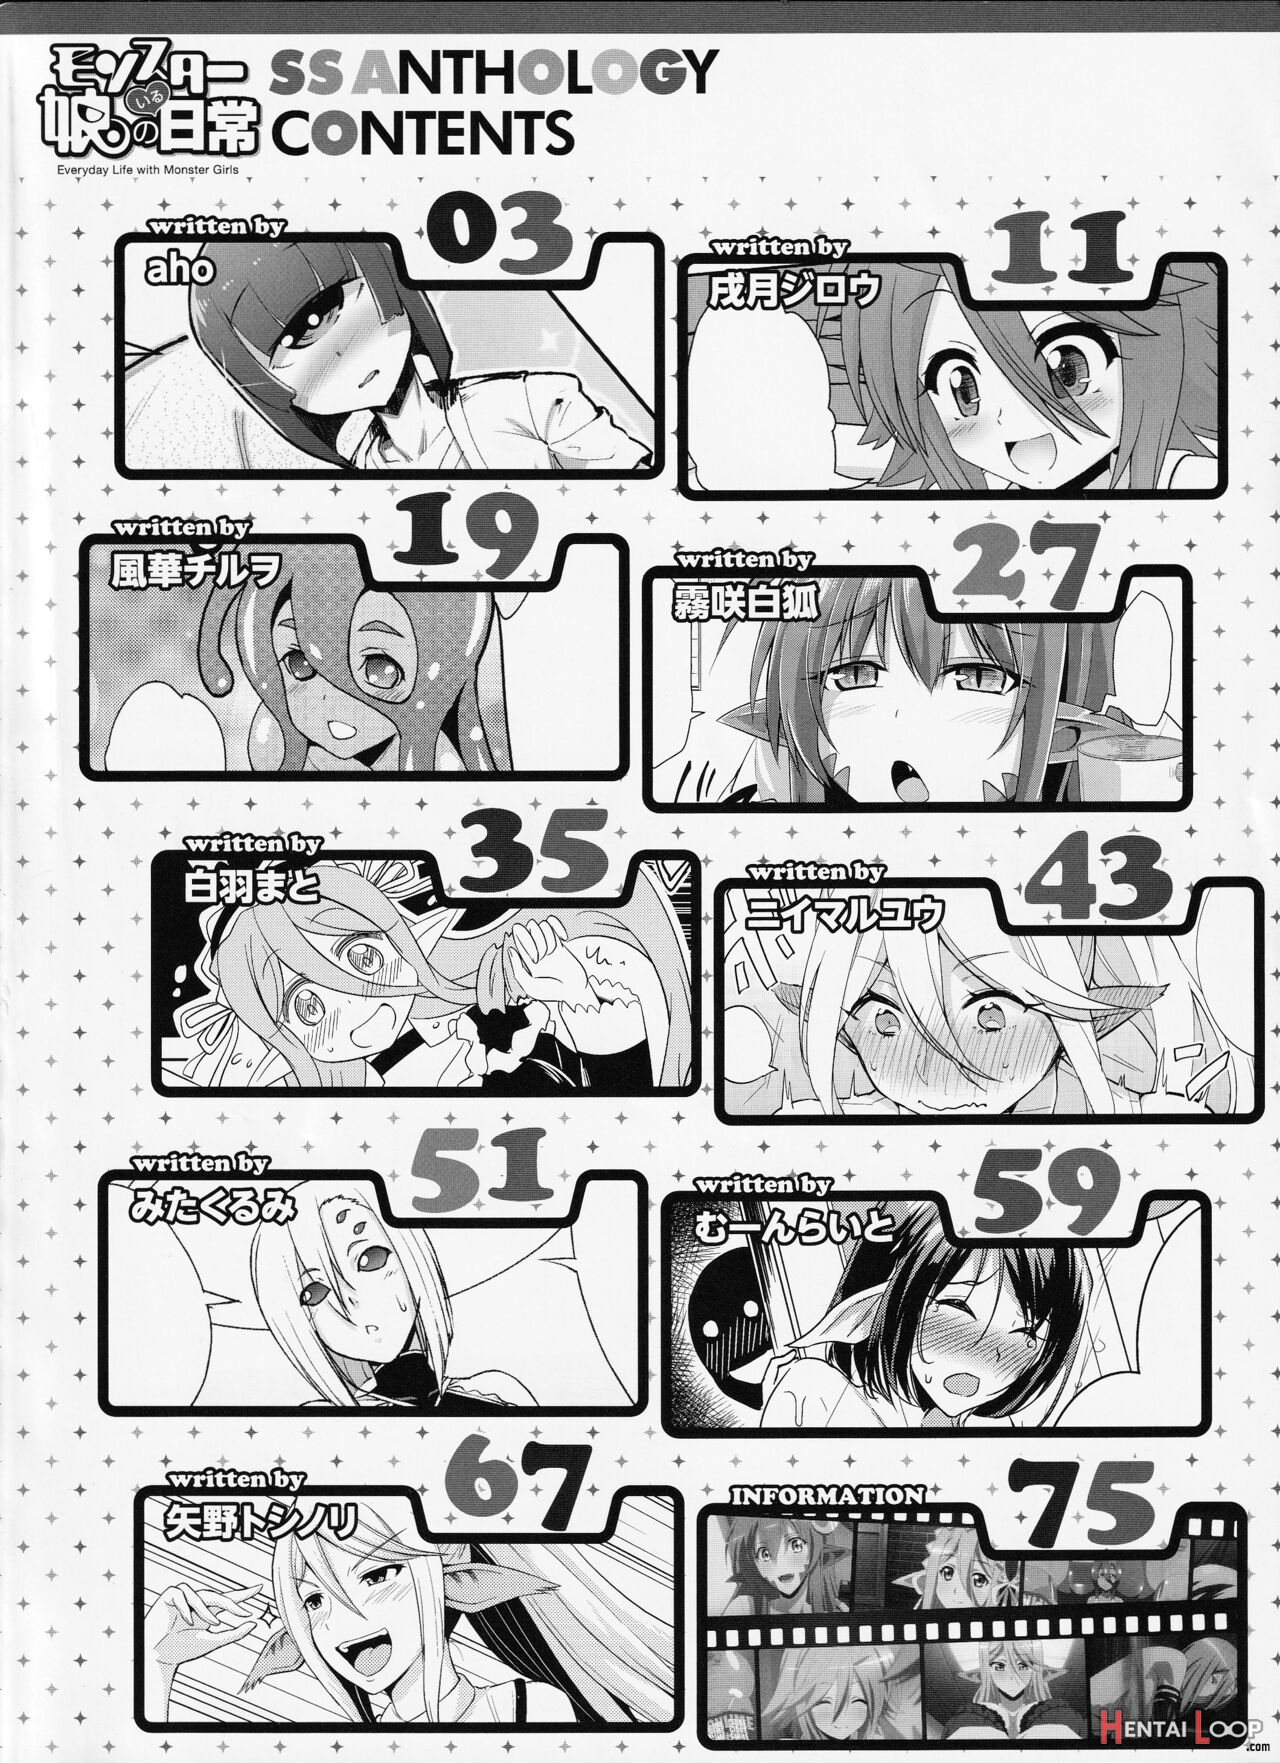 Monster Musume No Iru Nichijou Ss Anthology - Everyday Life With Monster Girls page 3